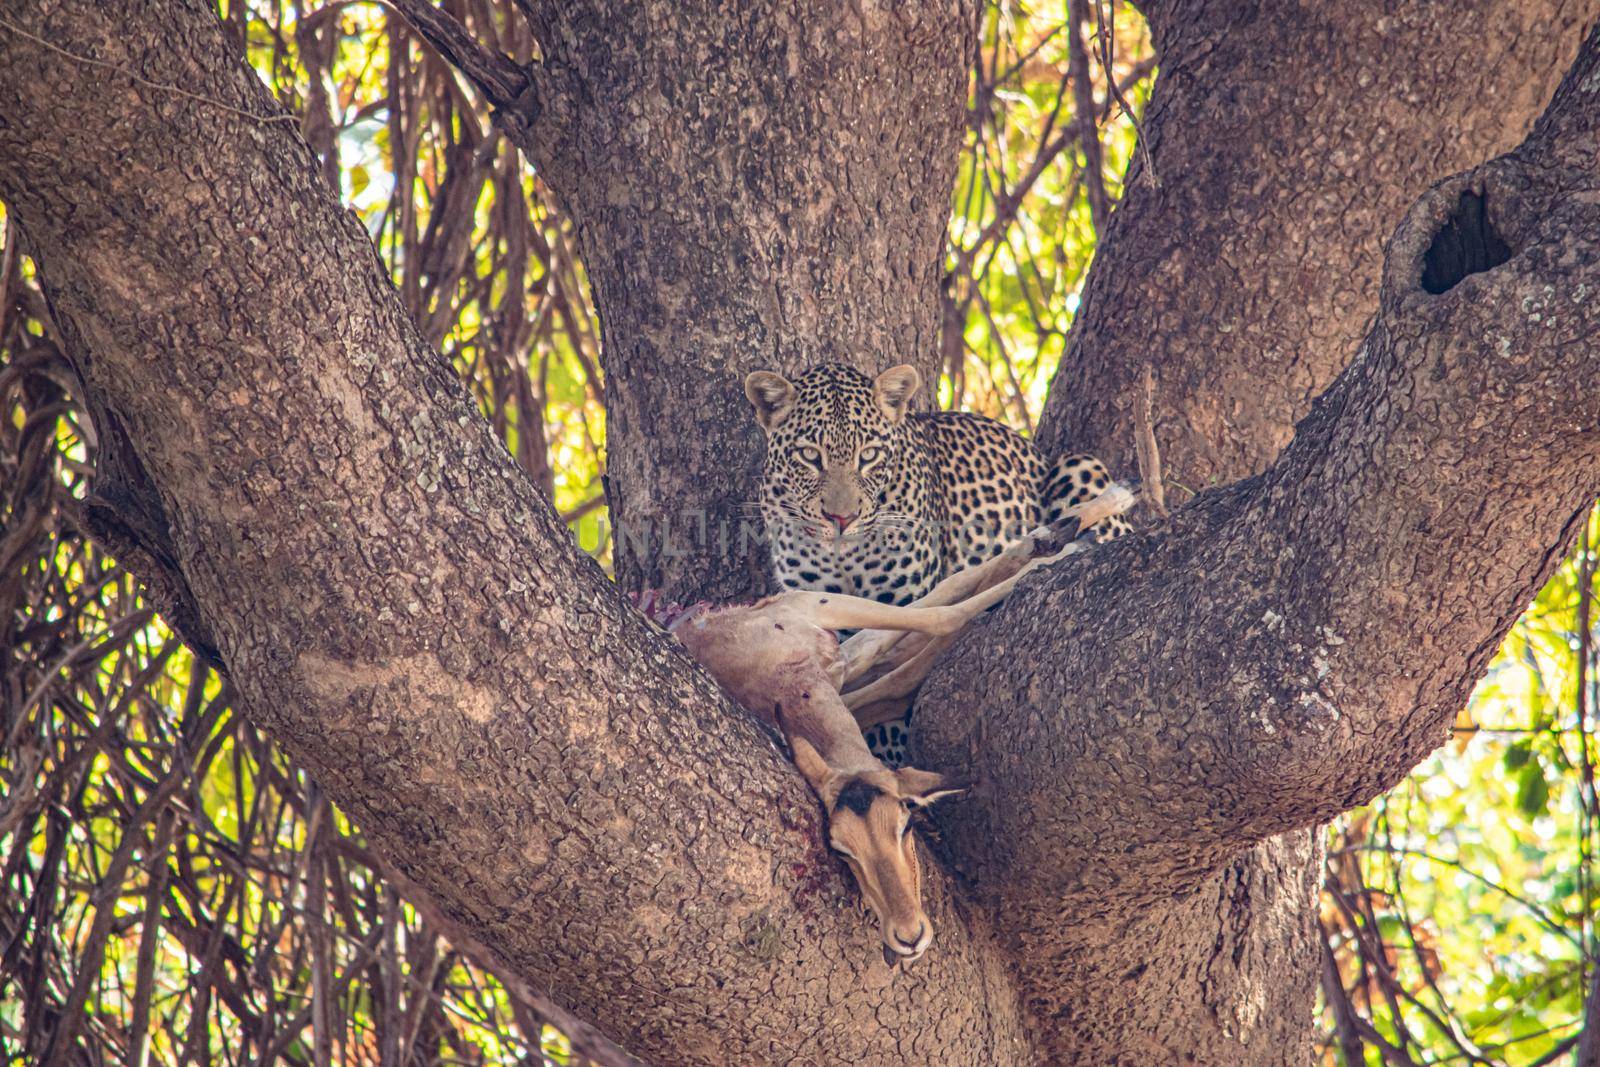 A close-up of a leopard eating an impala on a tree